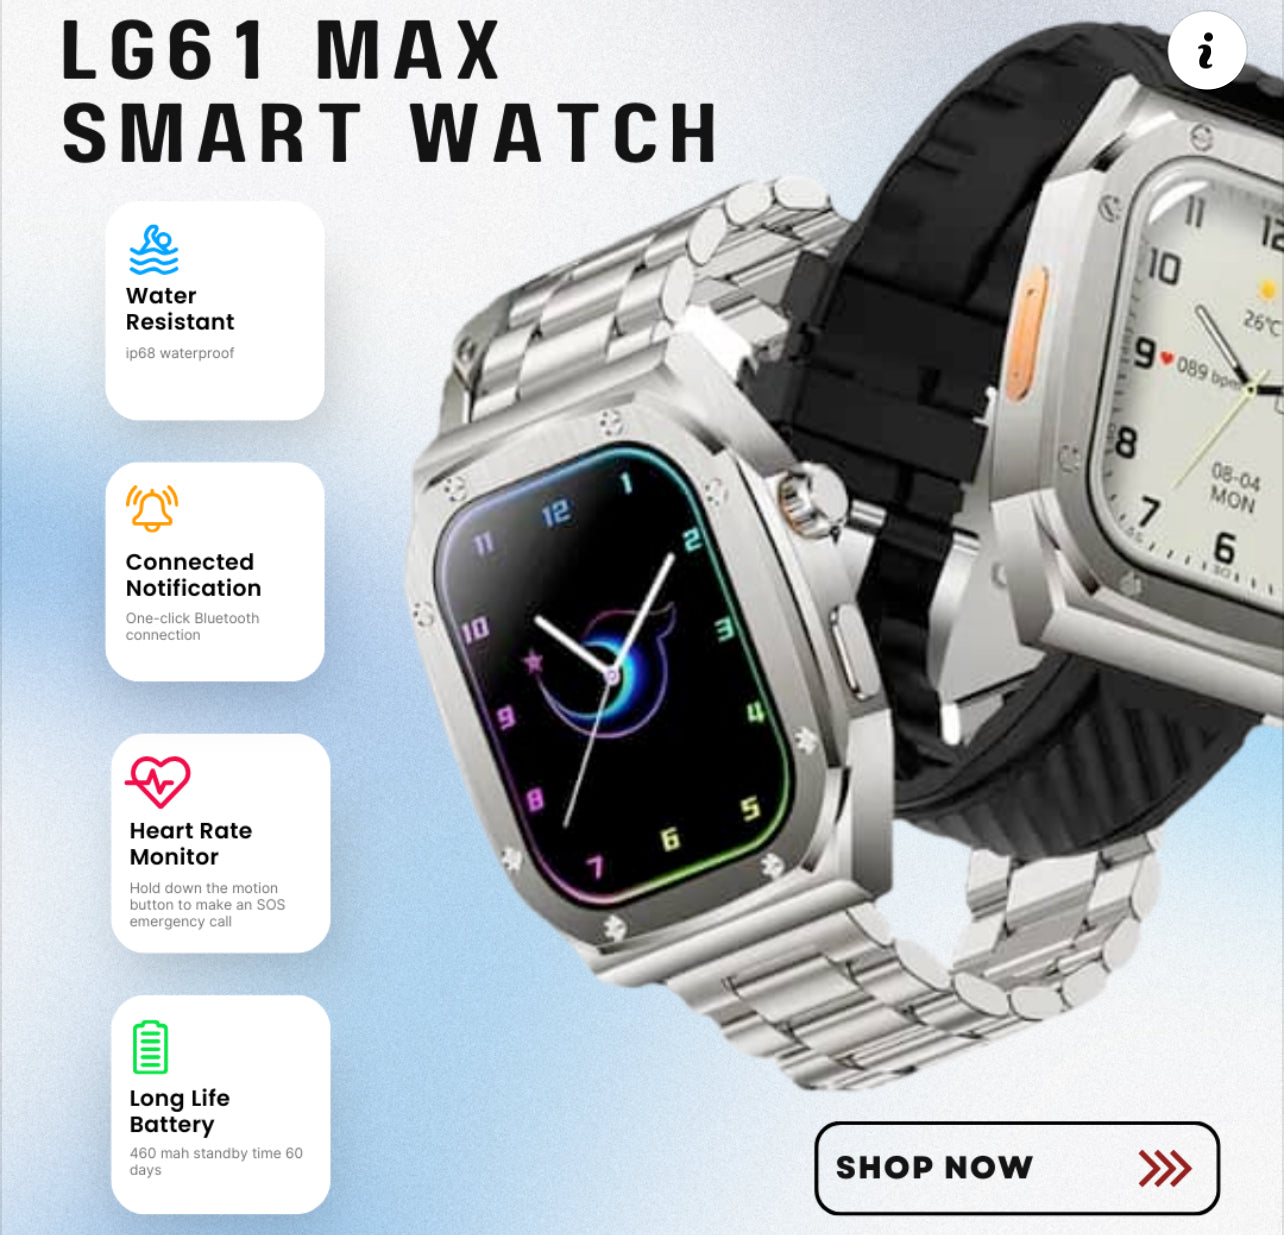 LG61 Max Smart Watch with Metal and one Silicon Strap